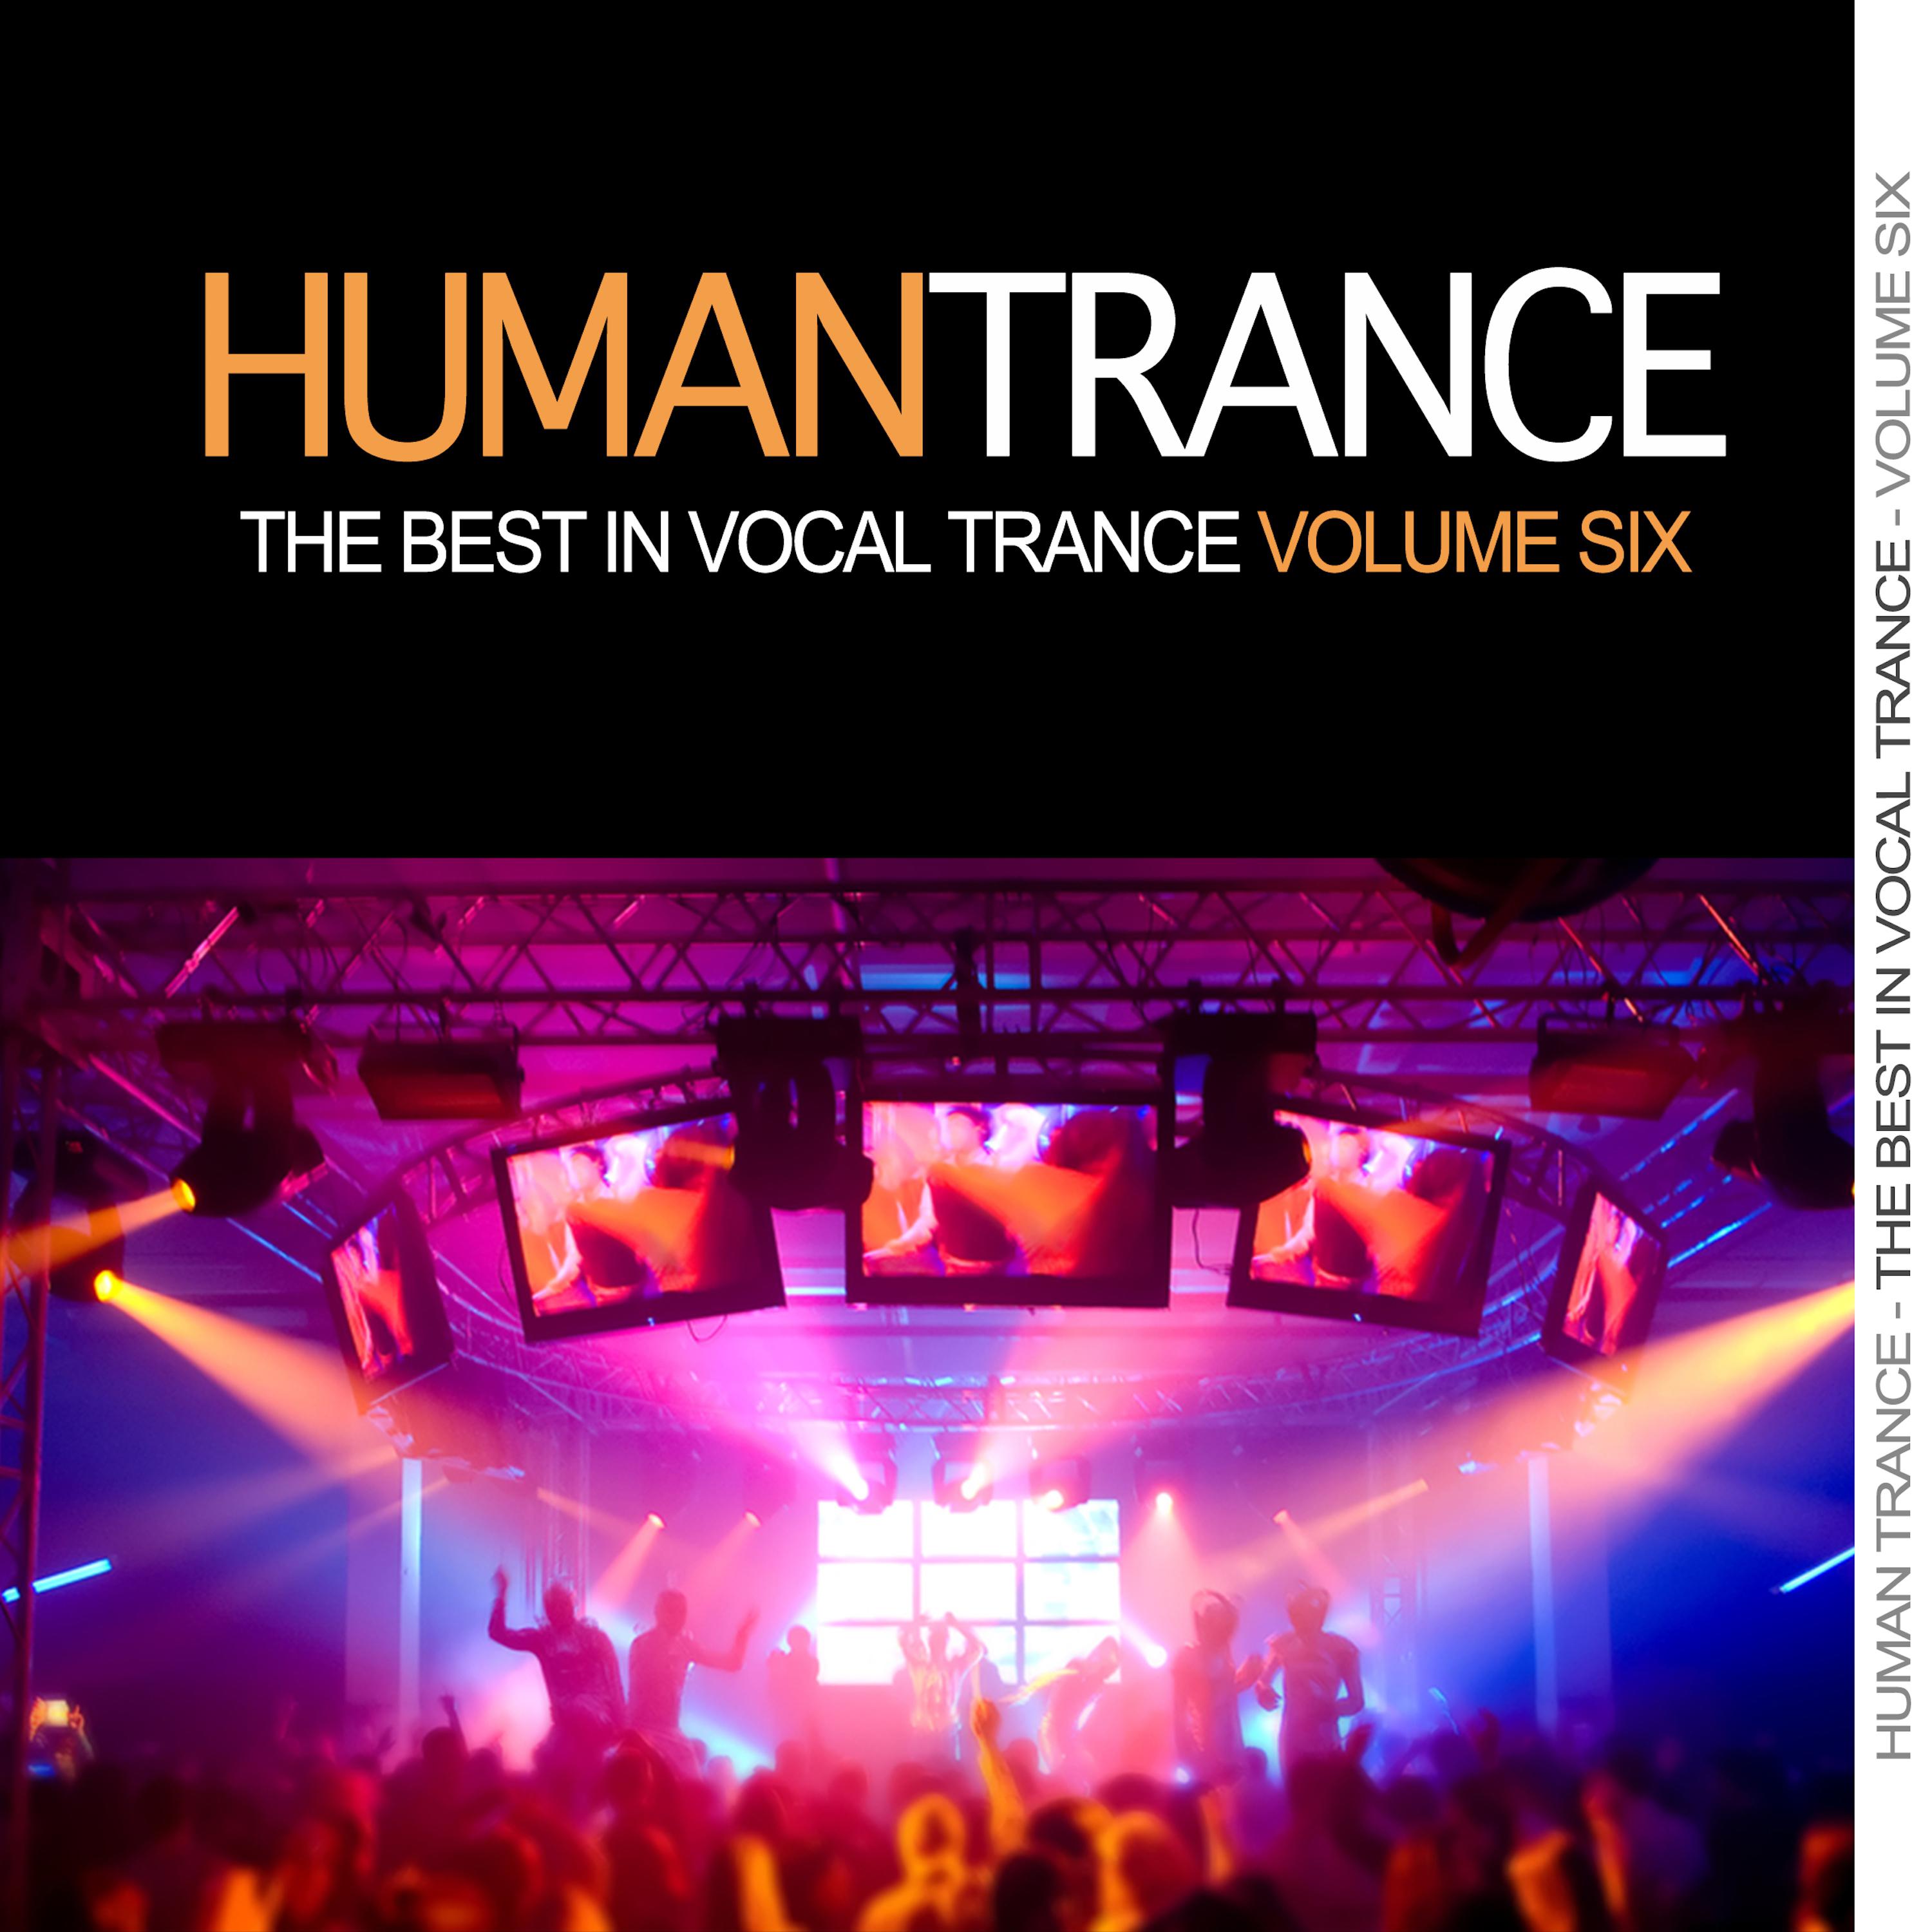 Human Trance, Vol. 6 - Best in Vocal Trance!